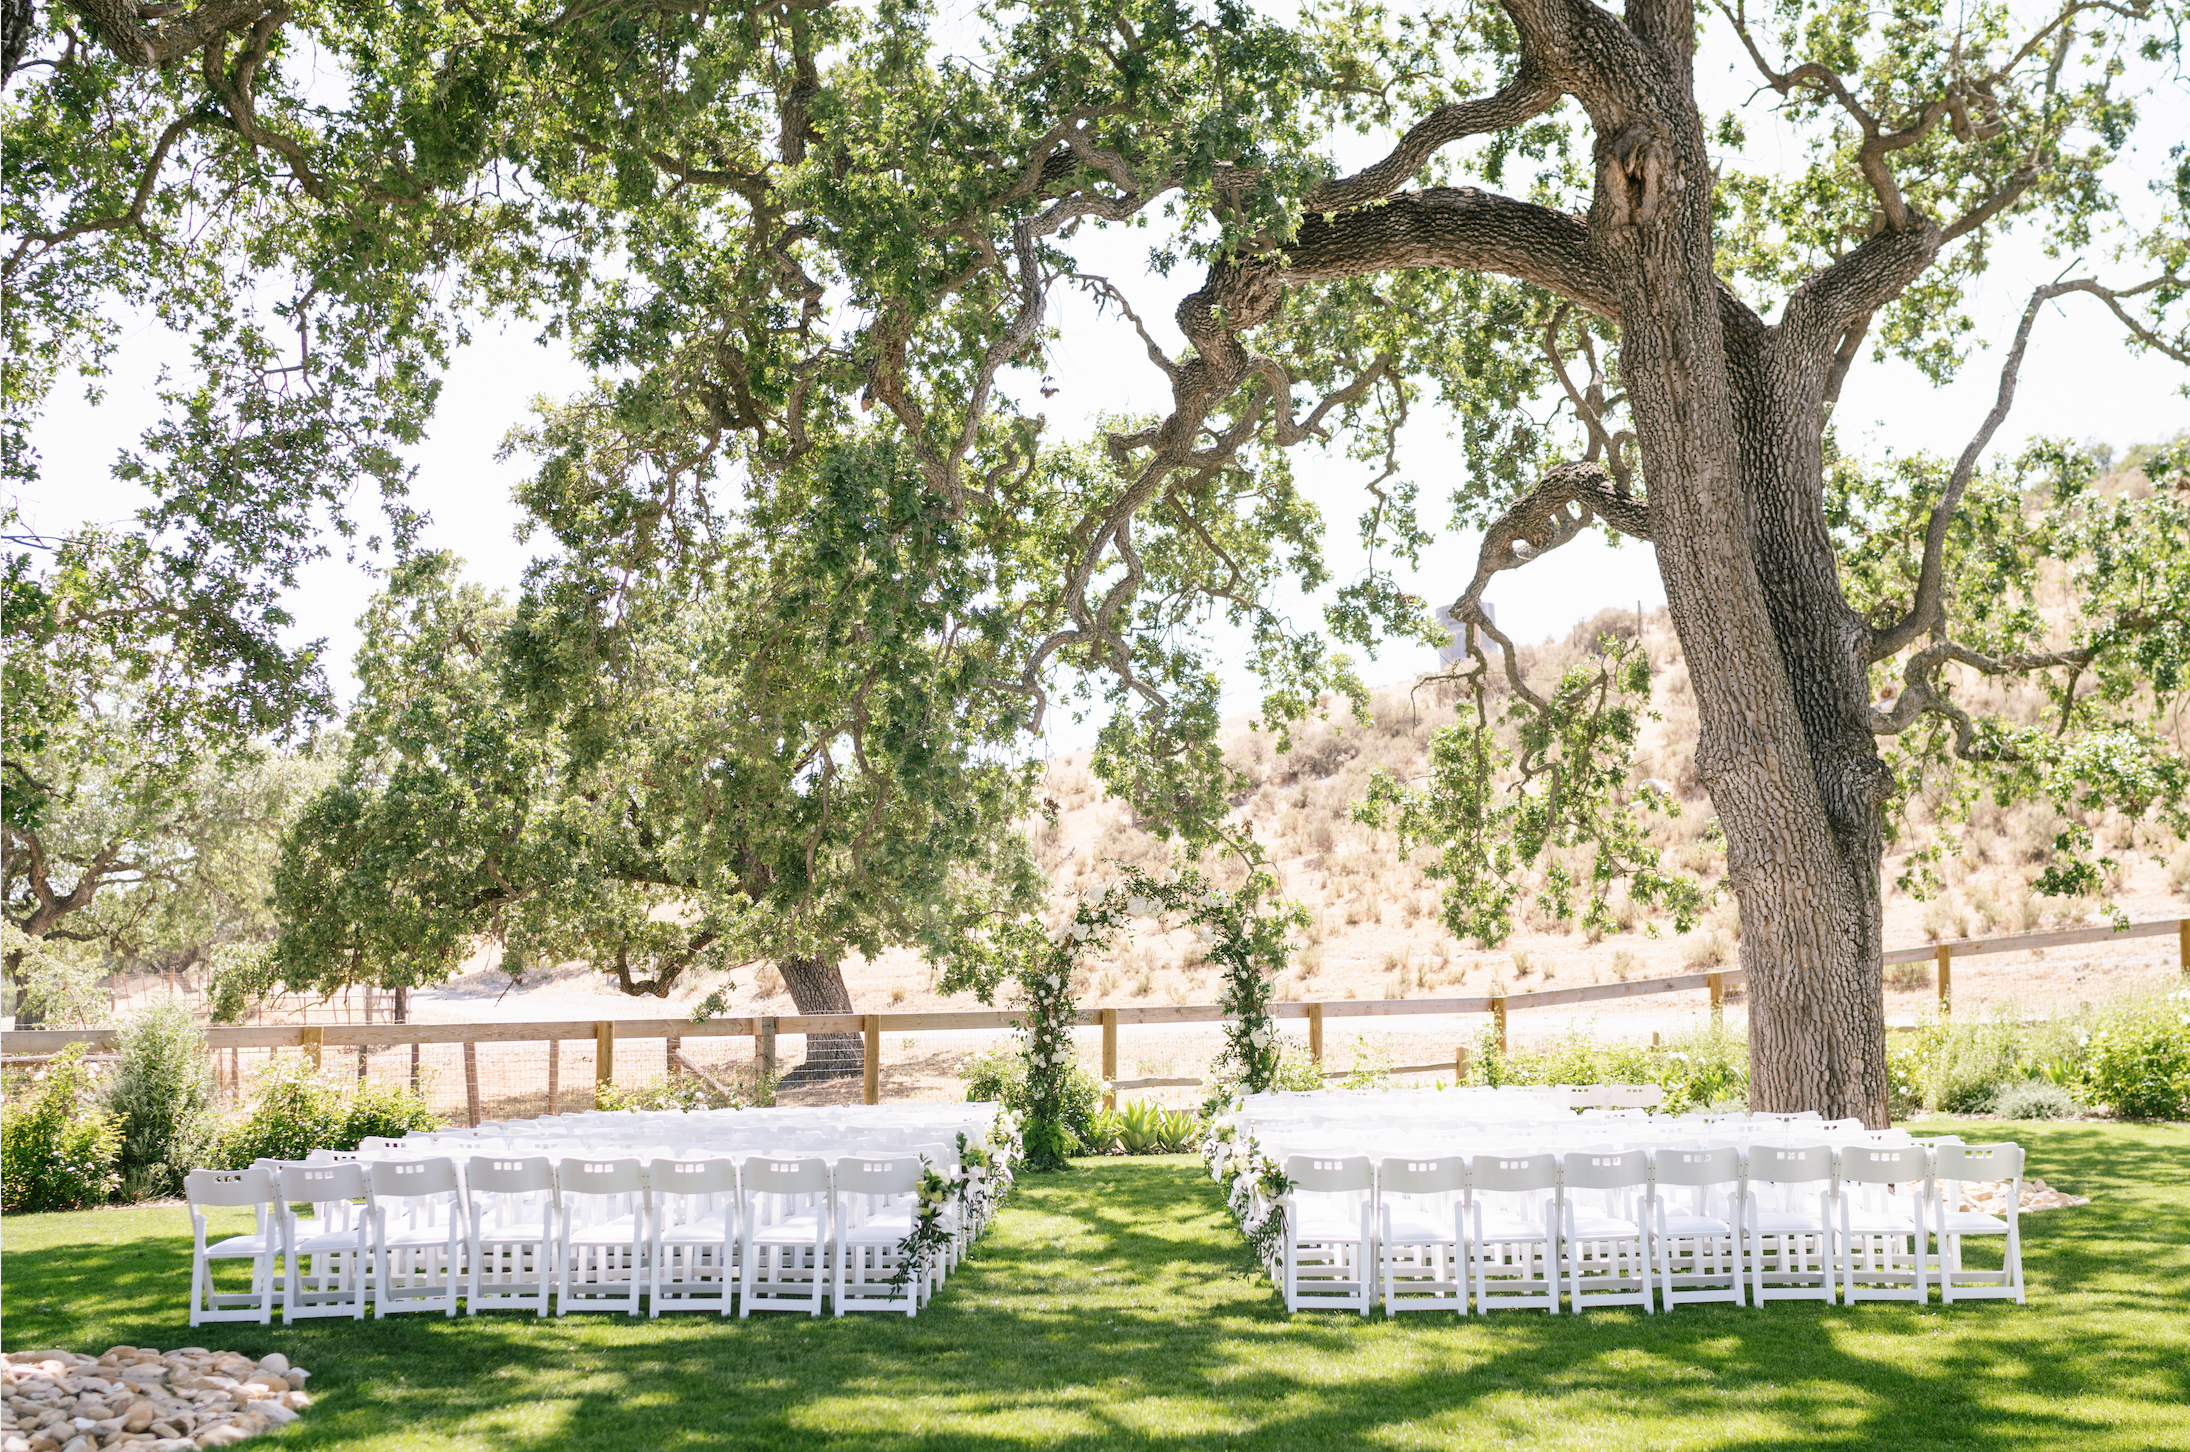 www.santabarbarawedding.com | Foxen Canyon Ranch | Jodee Debes Photography | LVL Weddings |   Jerry Palmer Flowers | Bright Event Rentals | The Society Band | The Ceremony Set Up